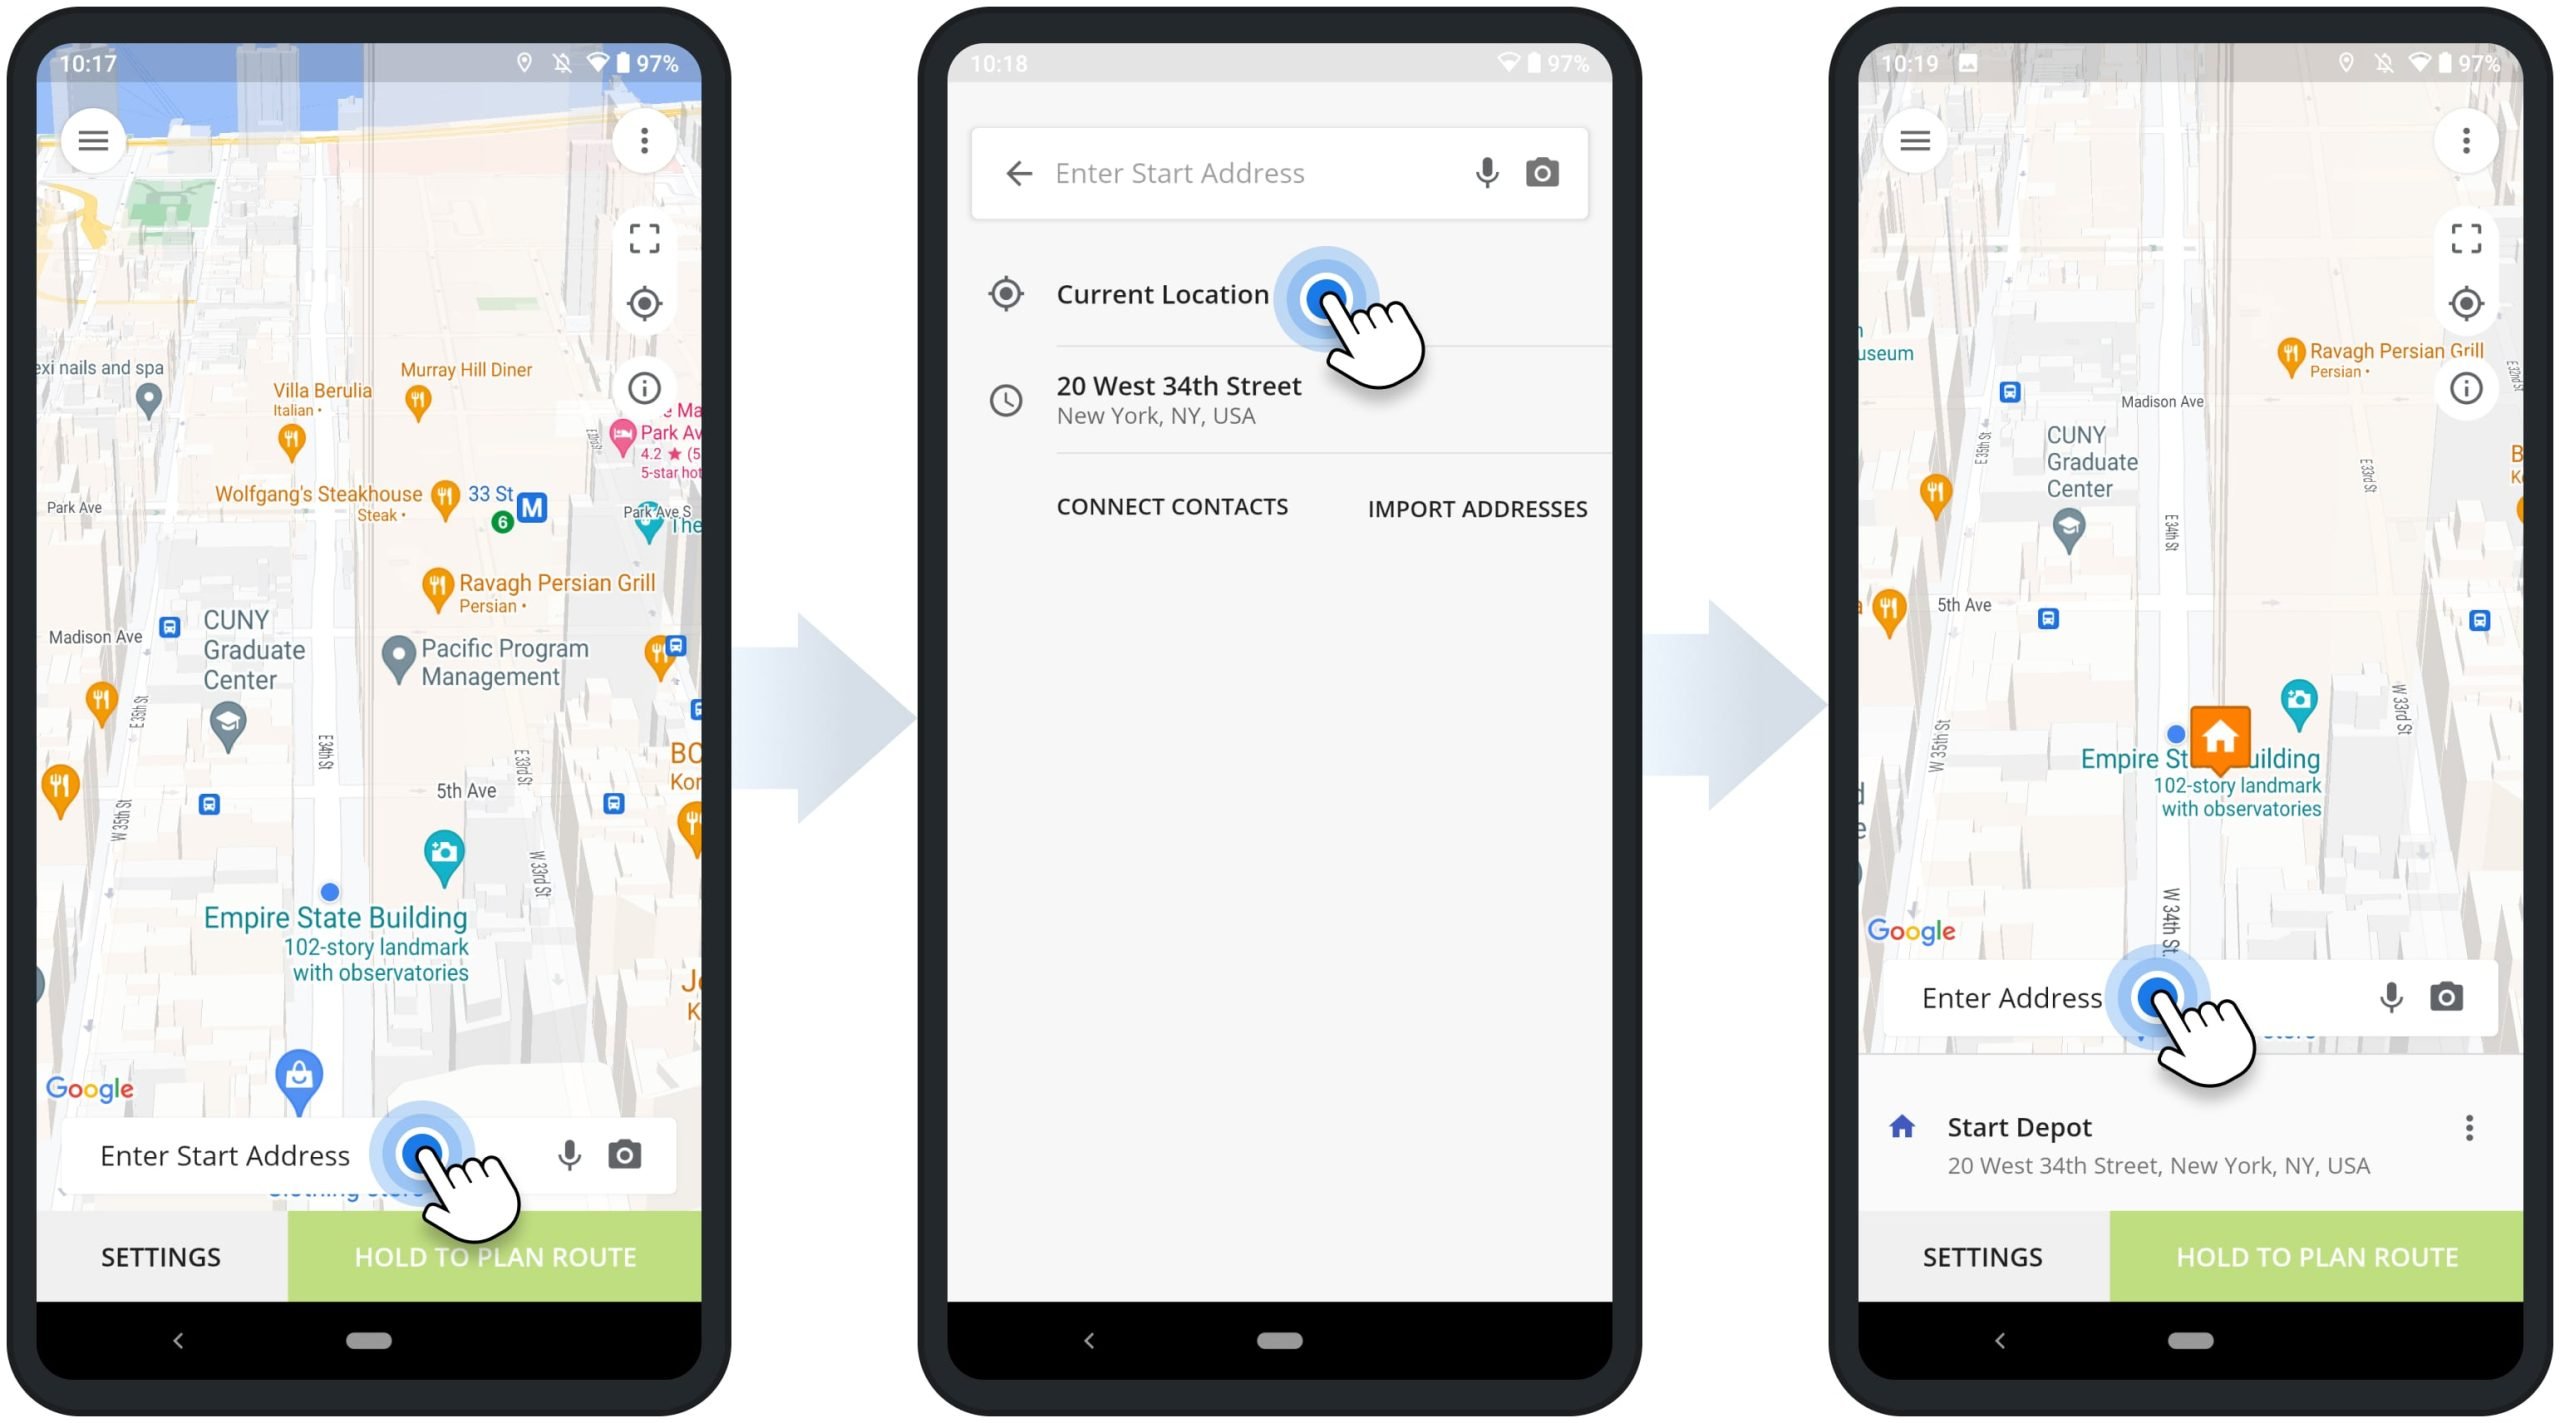 Add your current location as a route stop or route start depot on Route4Me's Android Multi-Stop Route Optimization App.